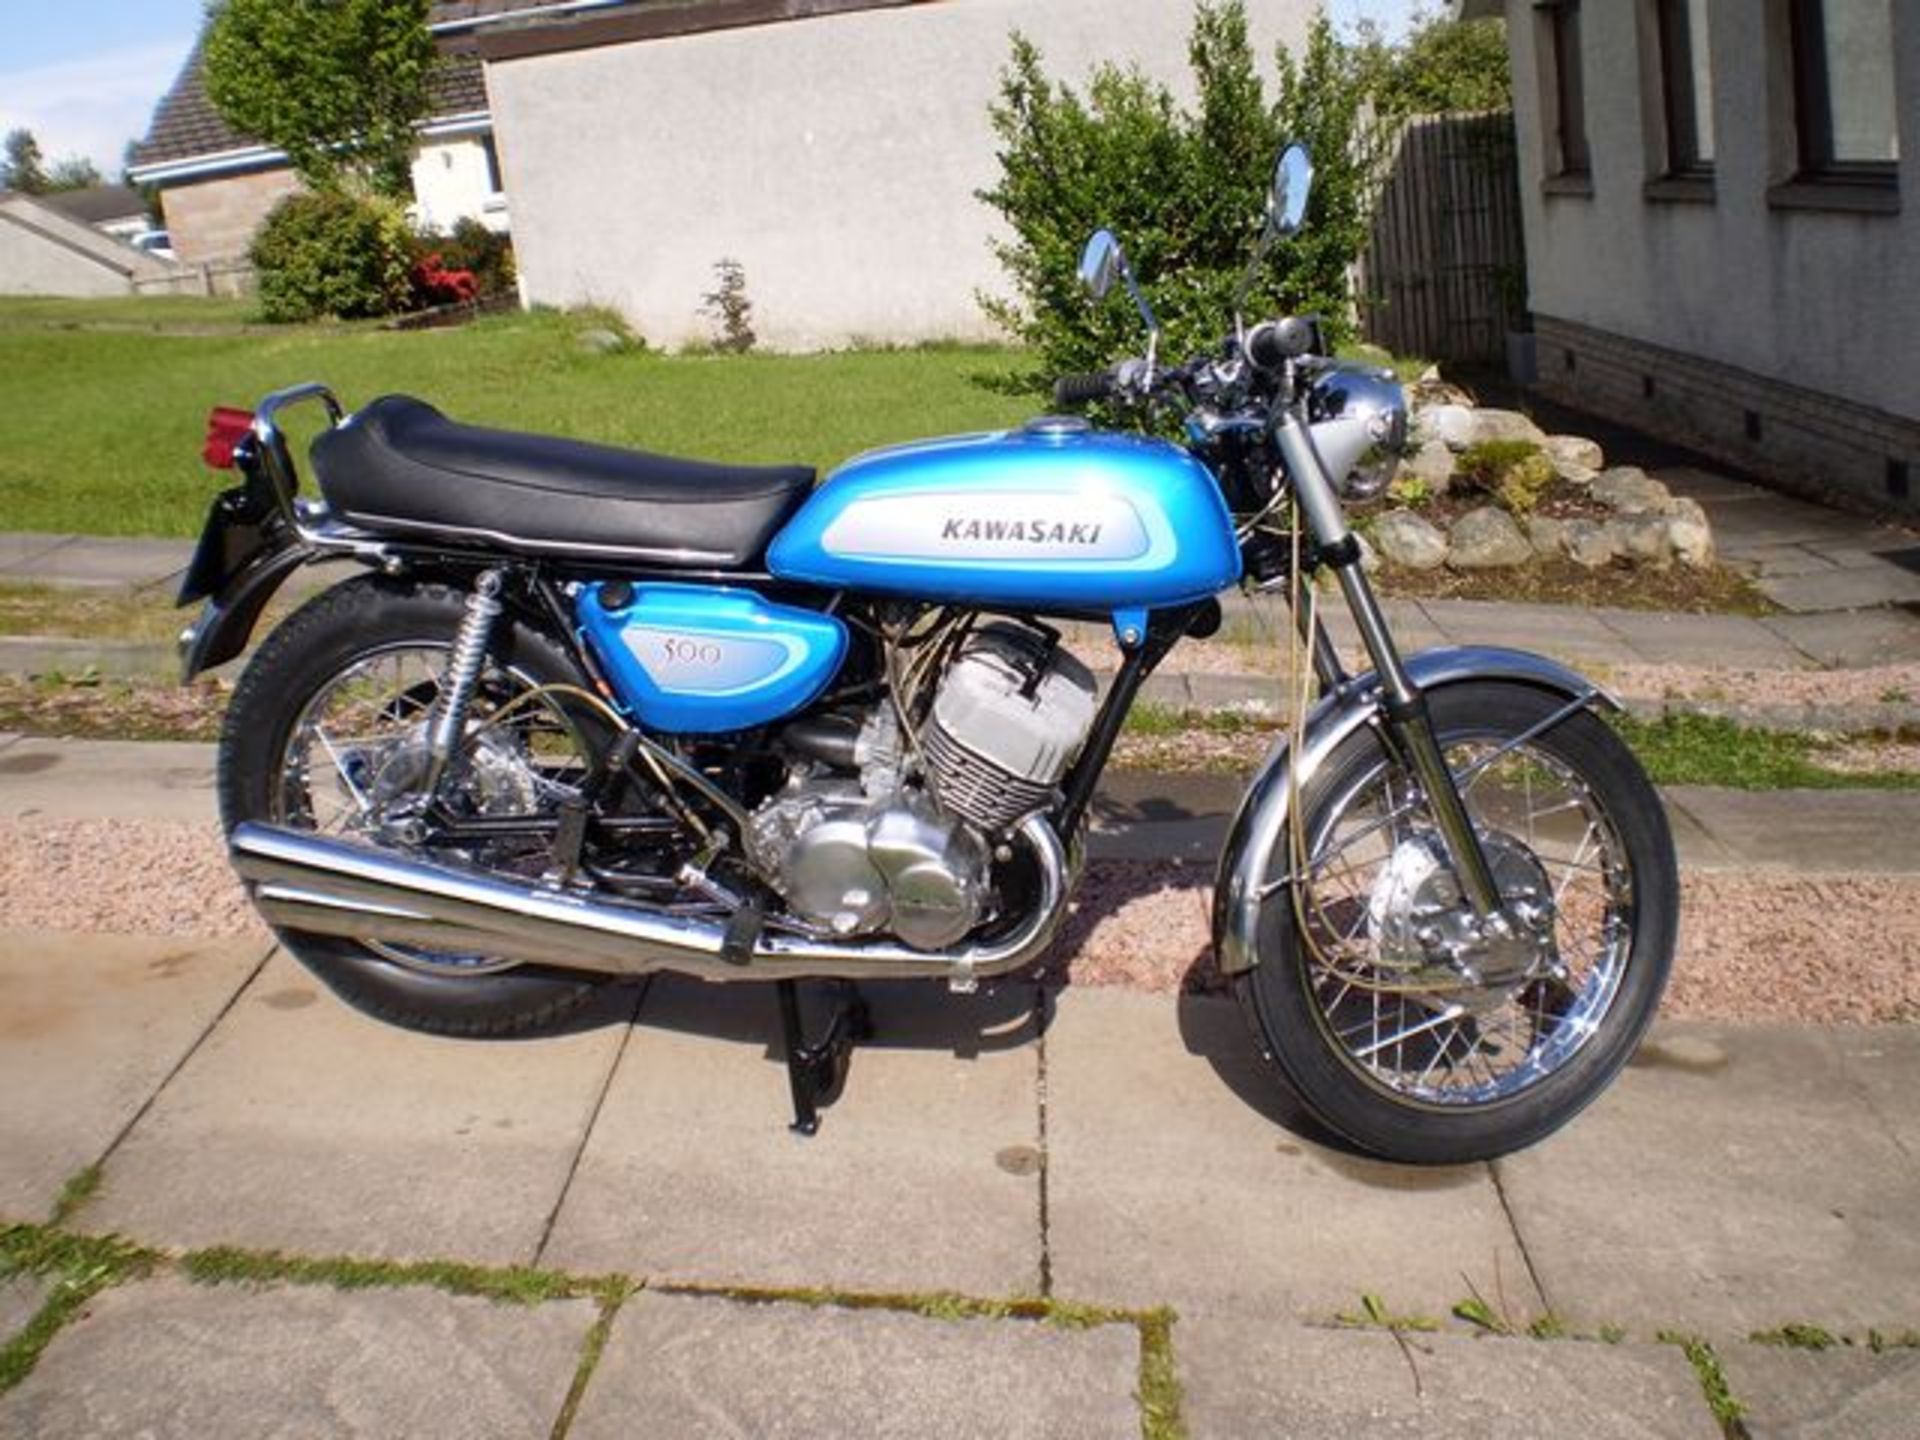 KAWASAKI, H1 - 500cc, Chassis number 33745 - the vendor states that this example is a genuine UK